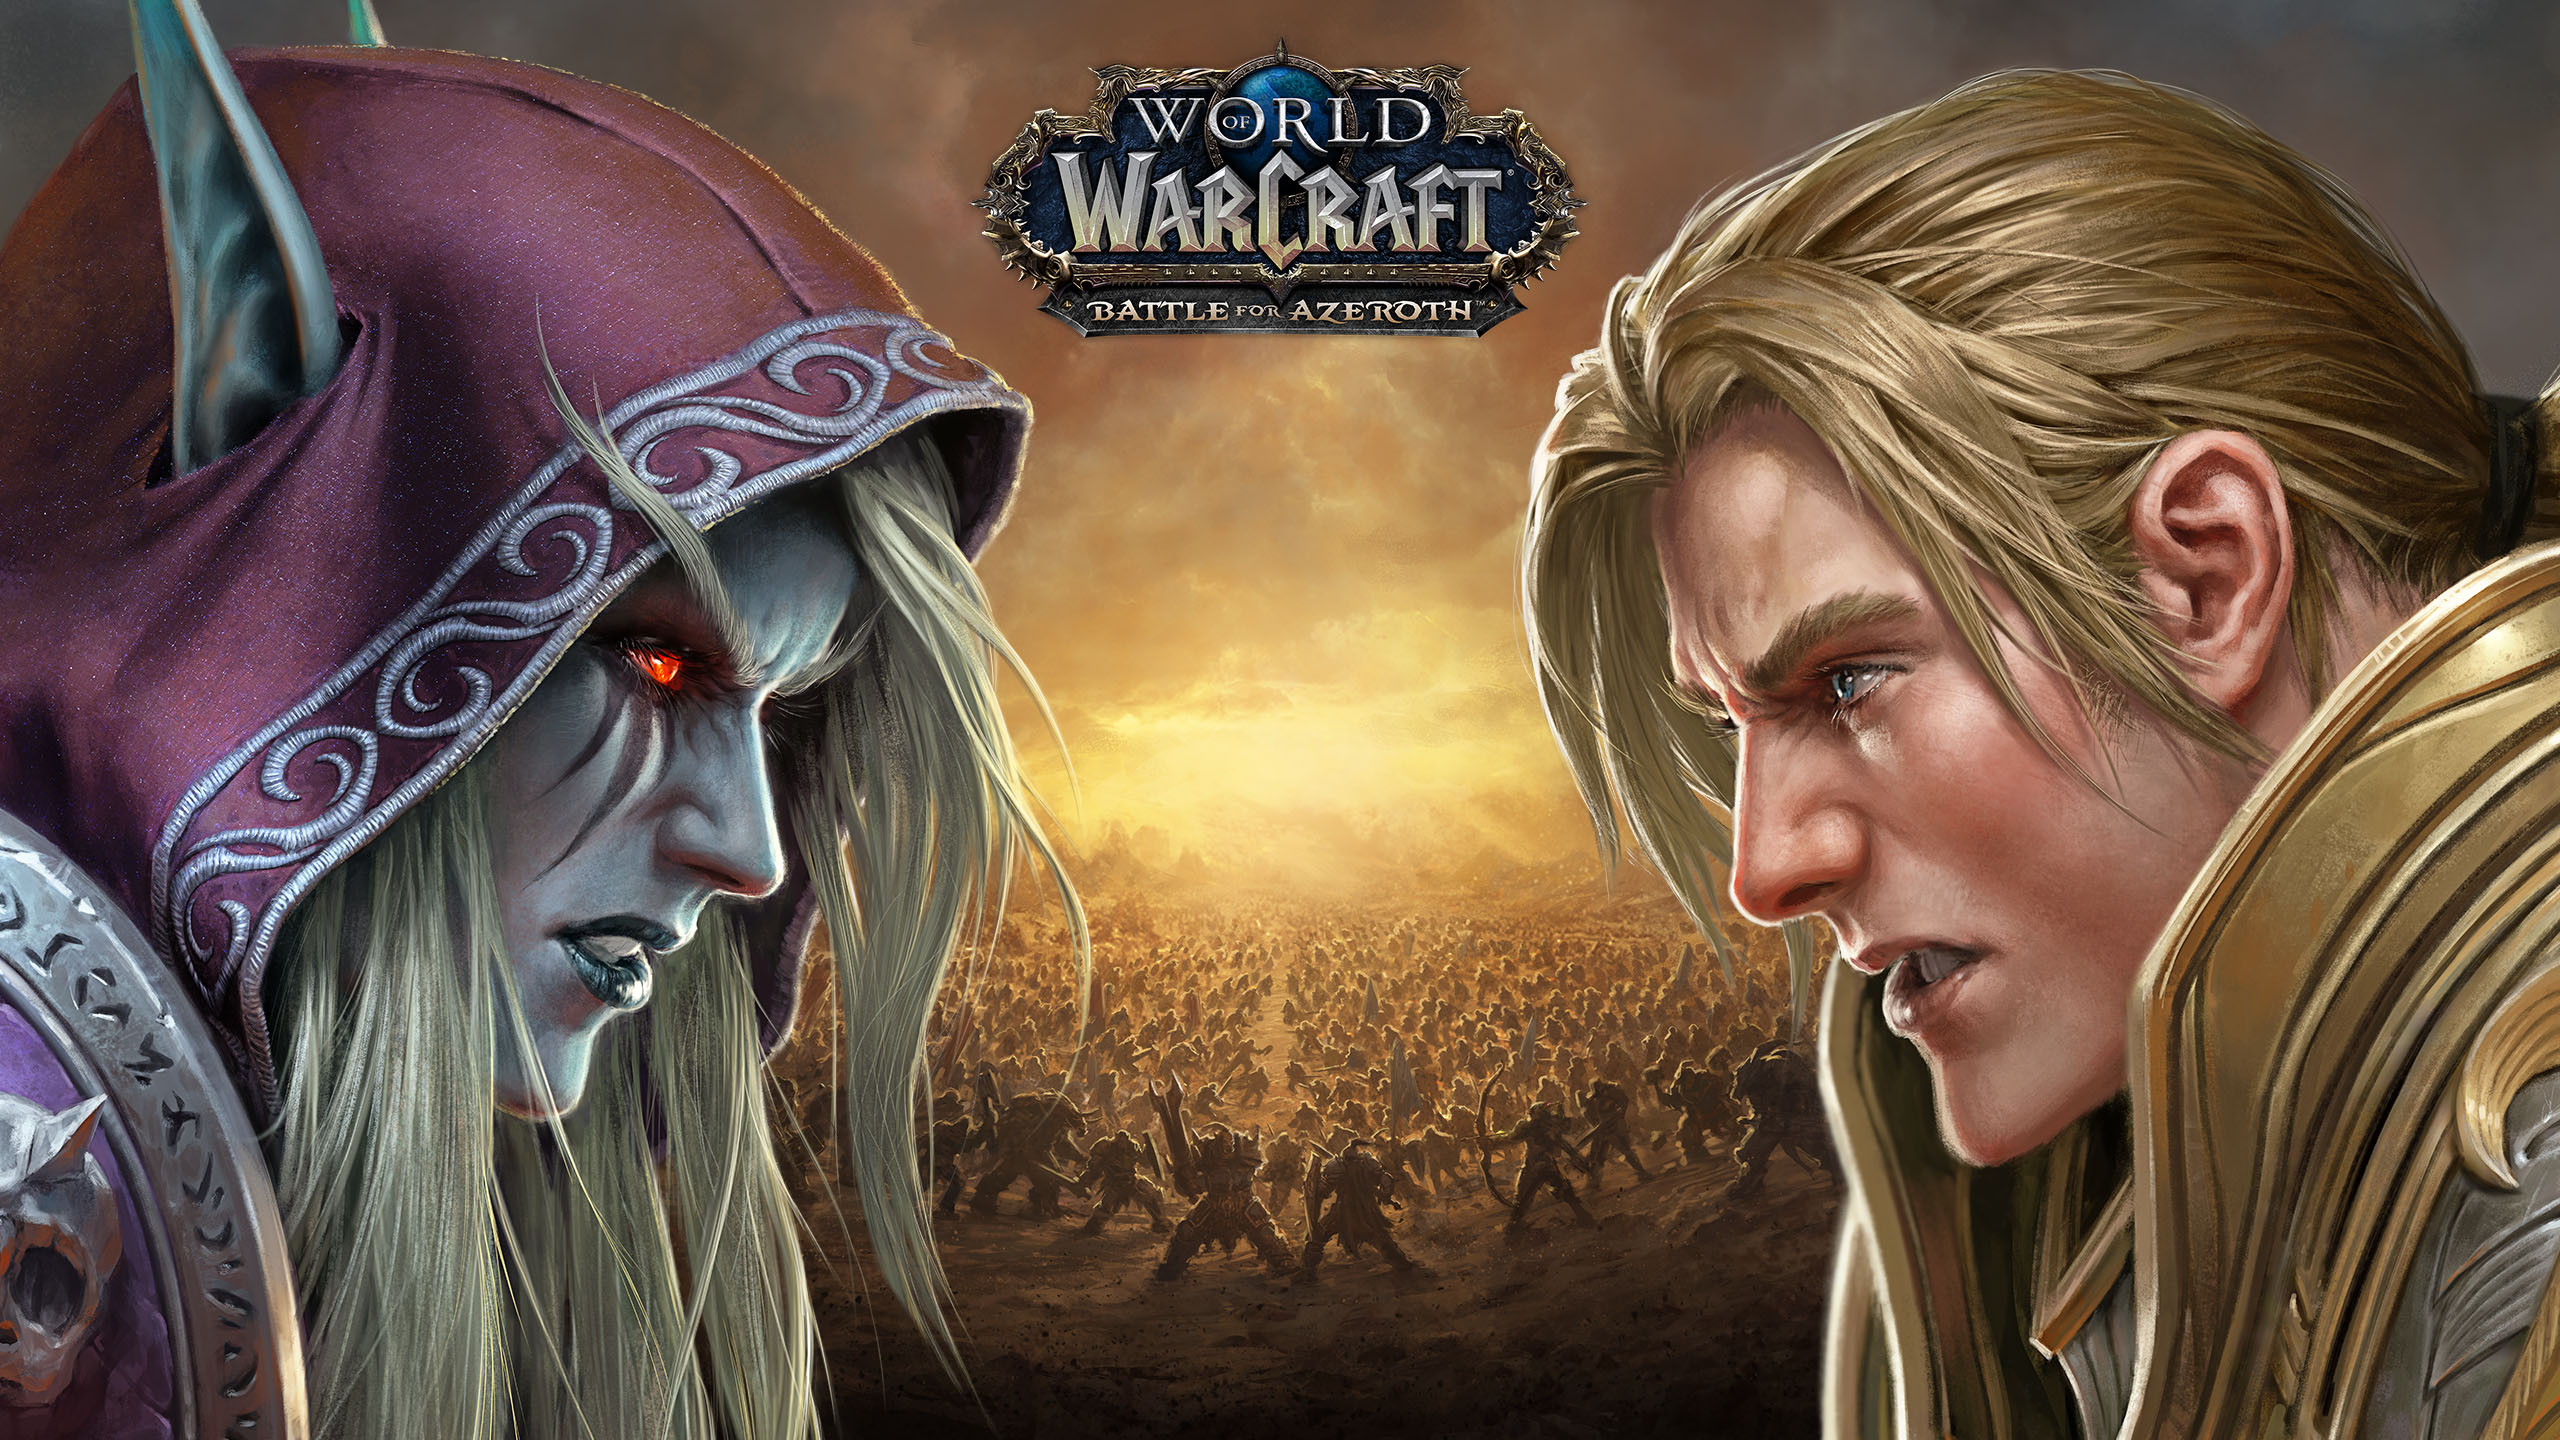 video game, world of warcraft: battle for azeroth, world of warcraft Full HD